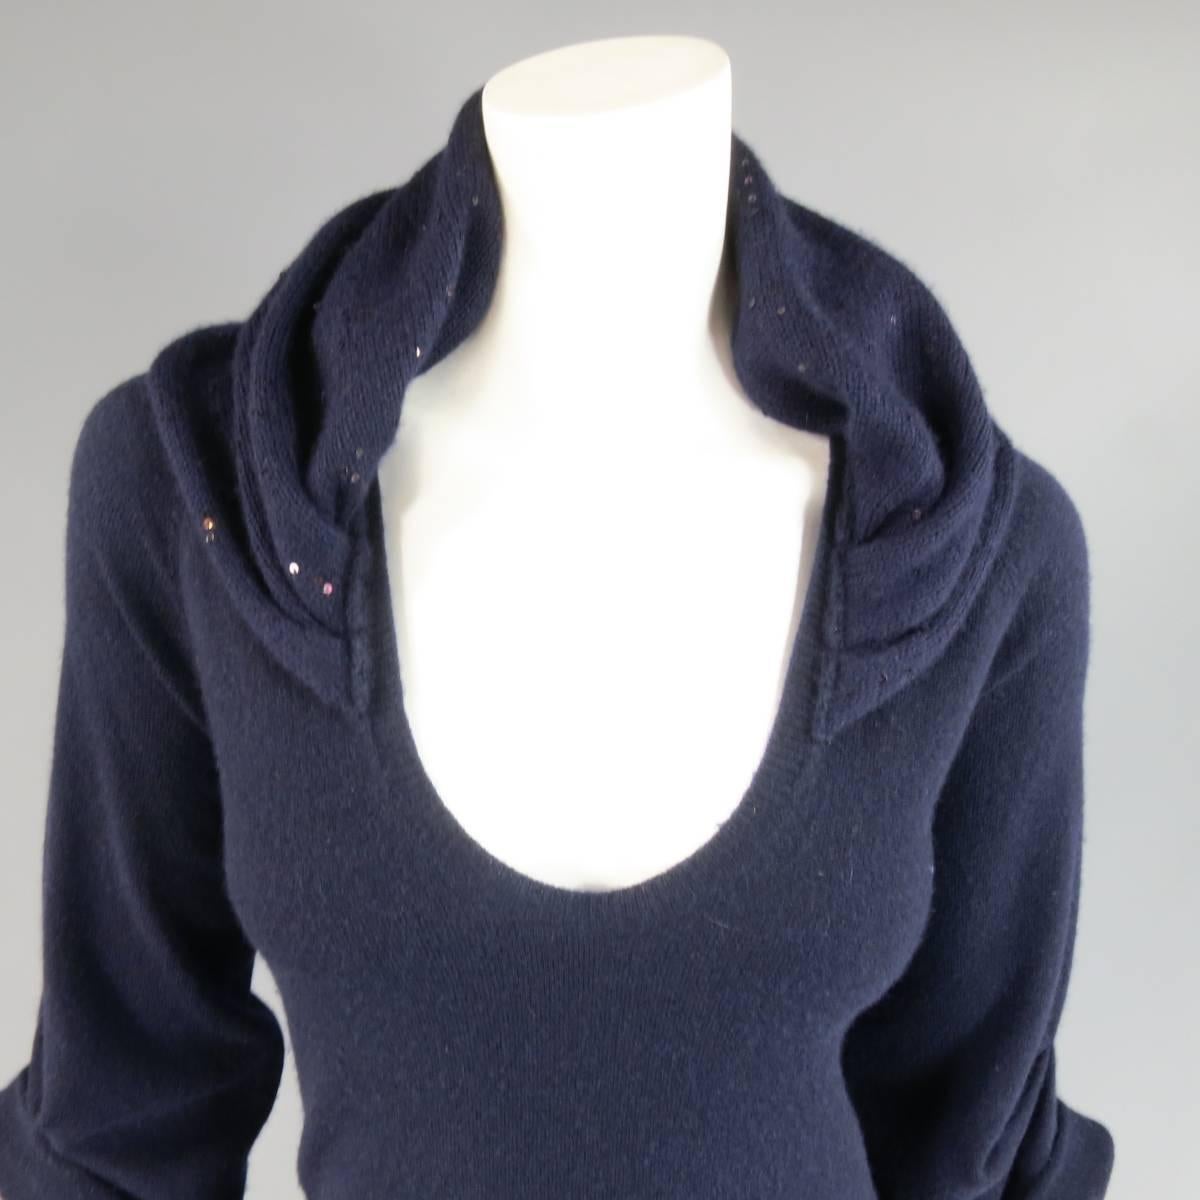 Lovely BRUNELLO CUCINELLI sweater dress in navy blue cashmere knit featuring an A line silhouette, three quarter gathered cuff sleeves, slit pockets, and V neck line with ruched sequin collar. Made in Italy.
 
Excellent Pre-Owned